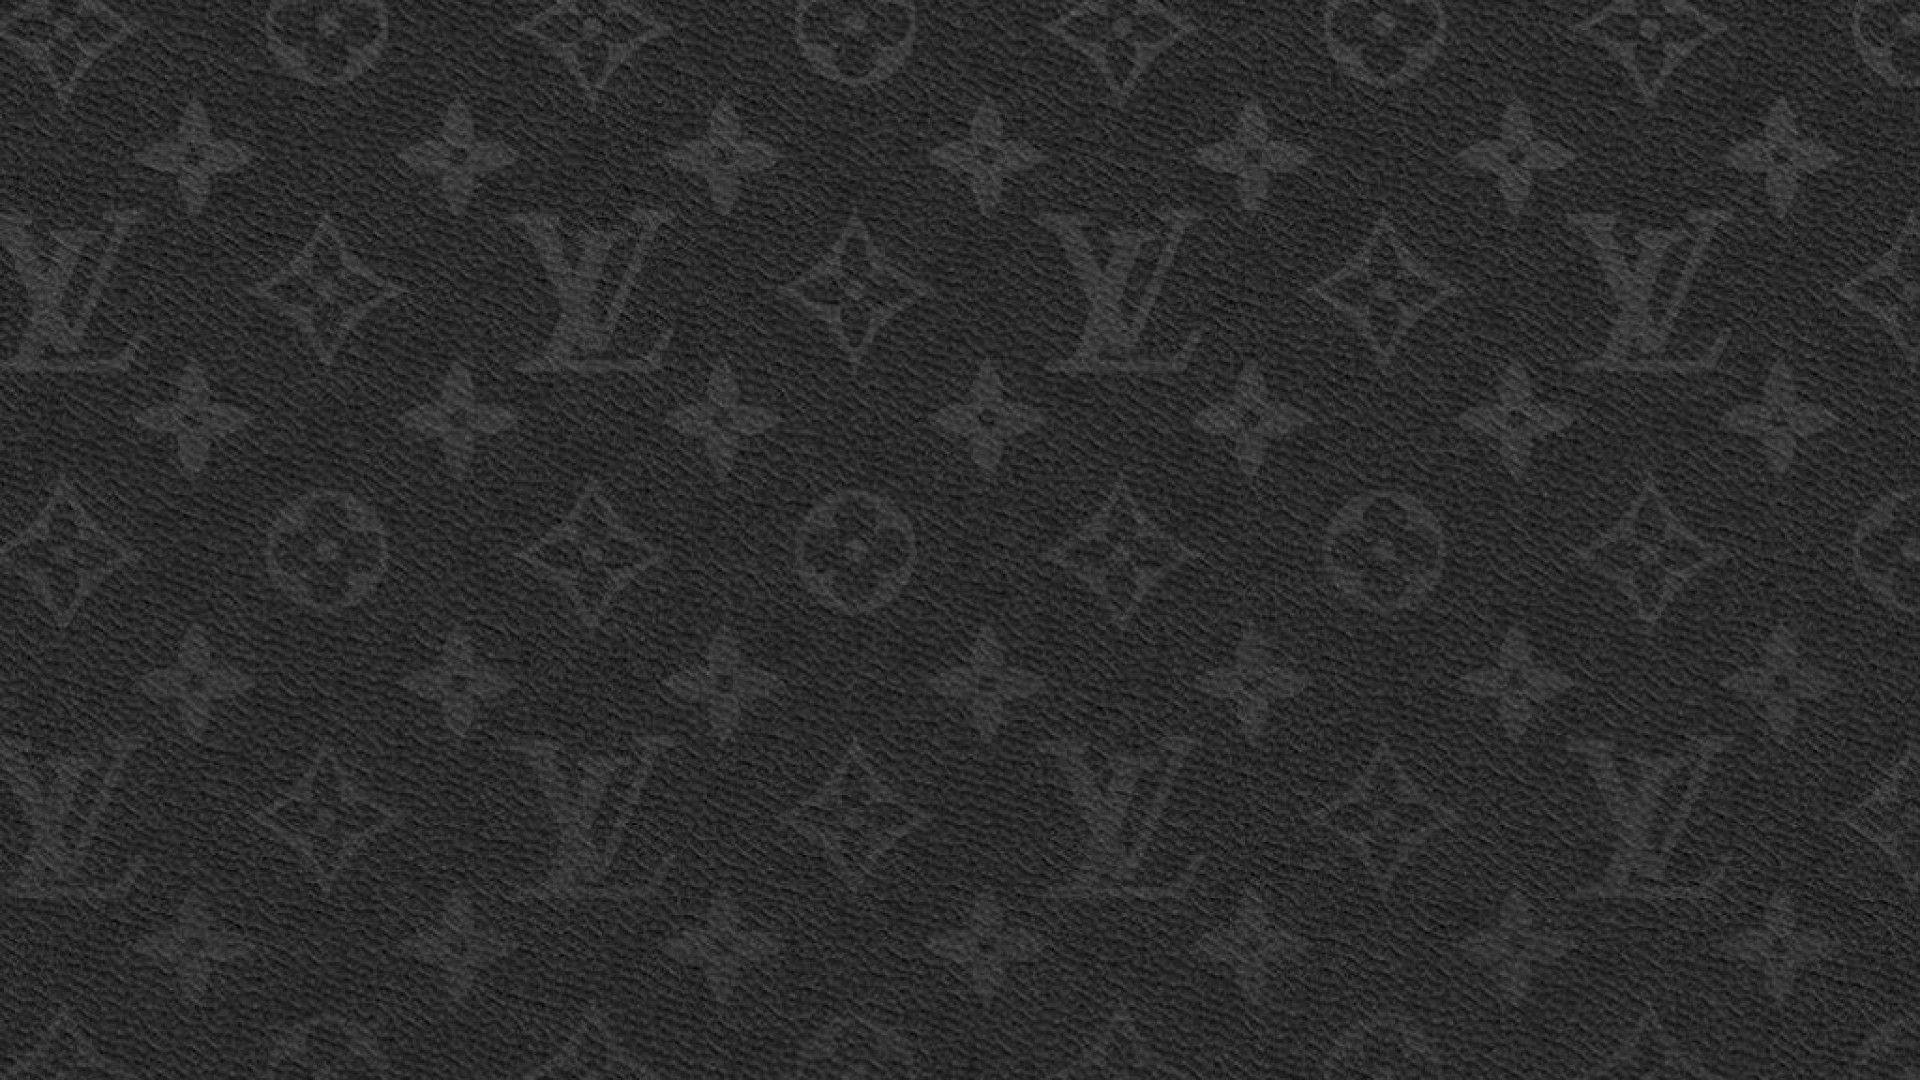 Aesthetic Louis Vuitton Wallpapers - Wallpaper Cave